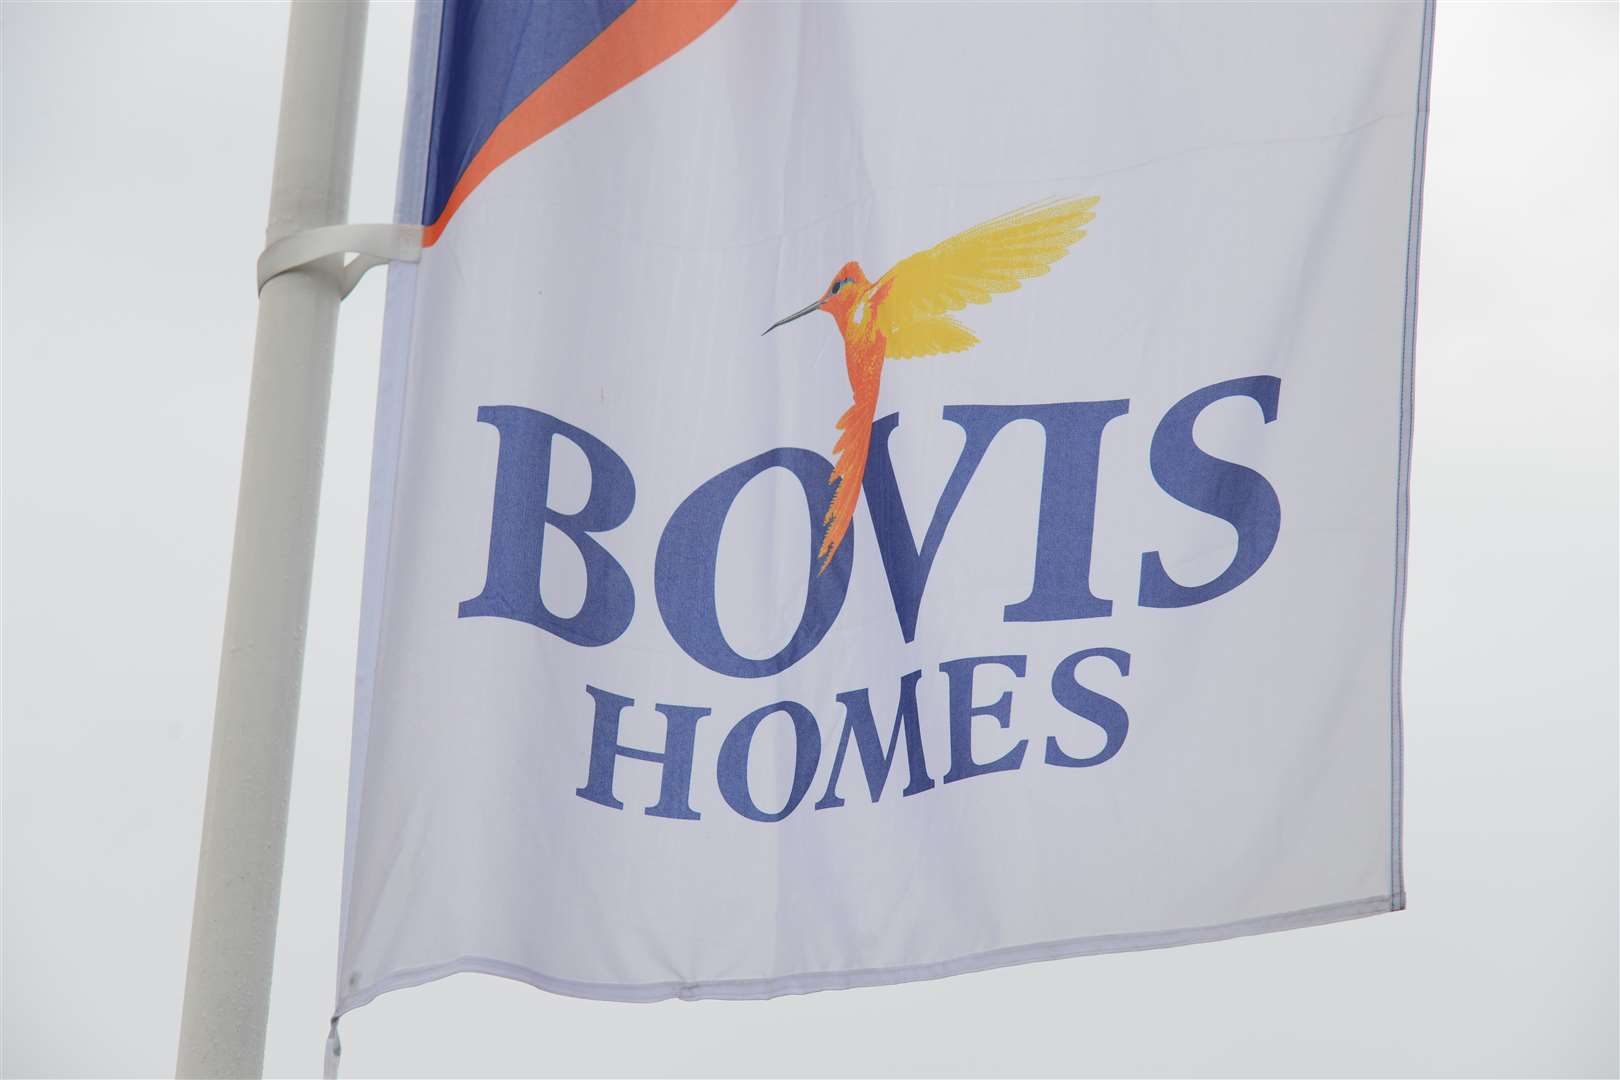 Bovis Homes says work will resume in early 2019